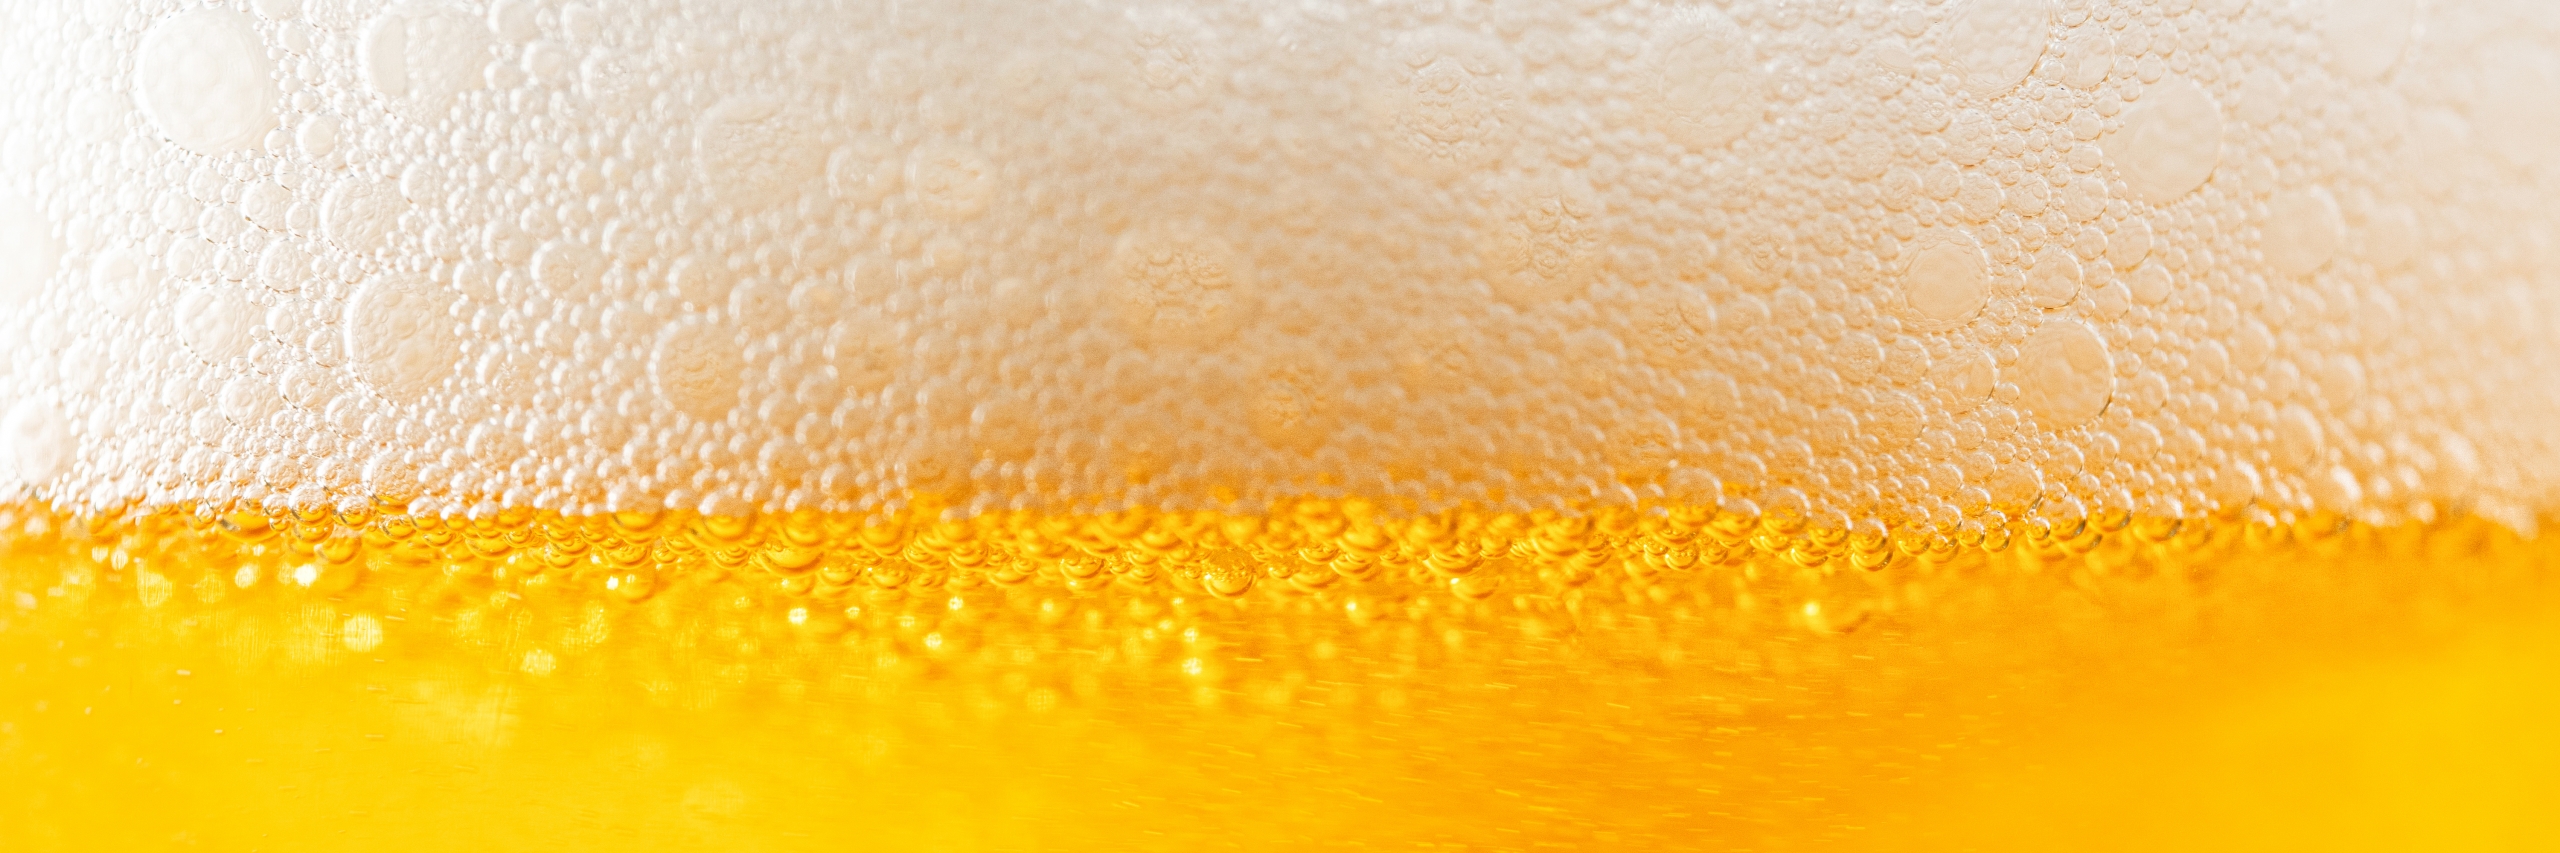 AdobeStock 304762444 scaled - Challenges for the brewing industry